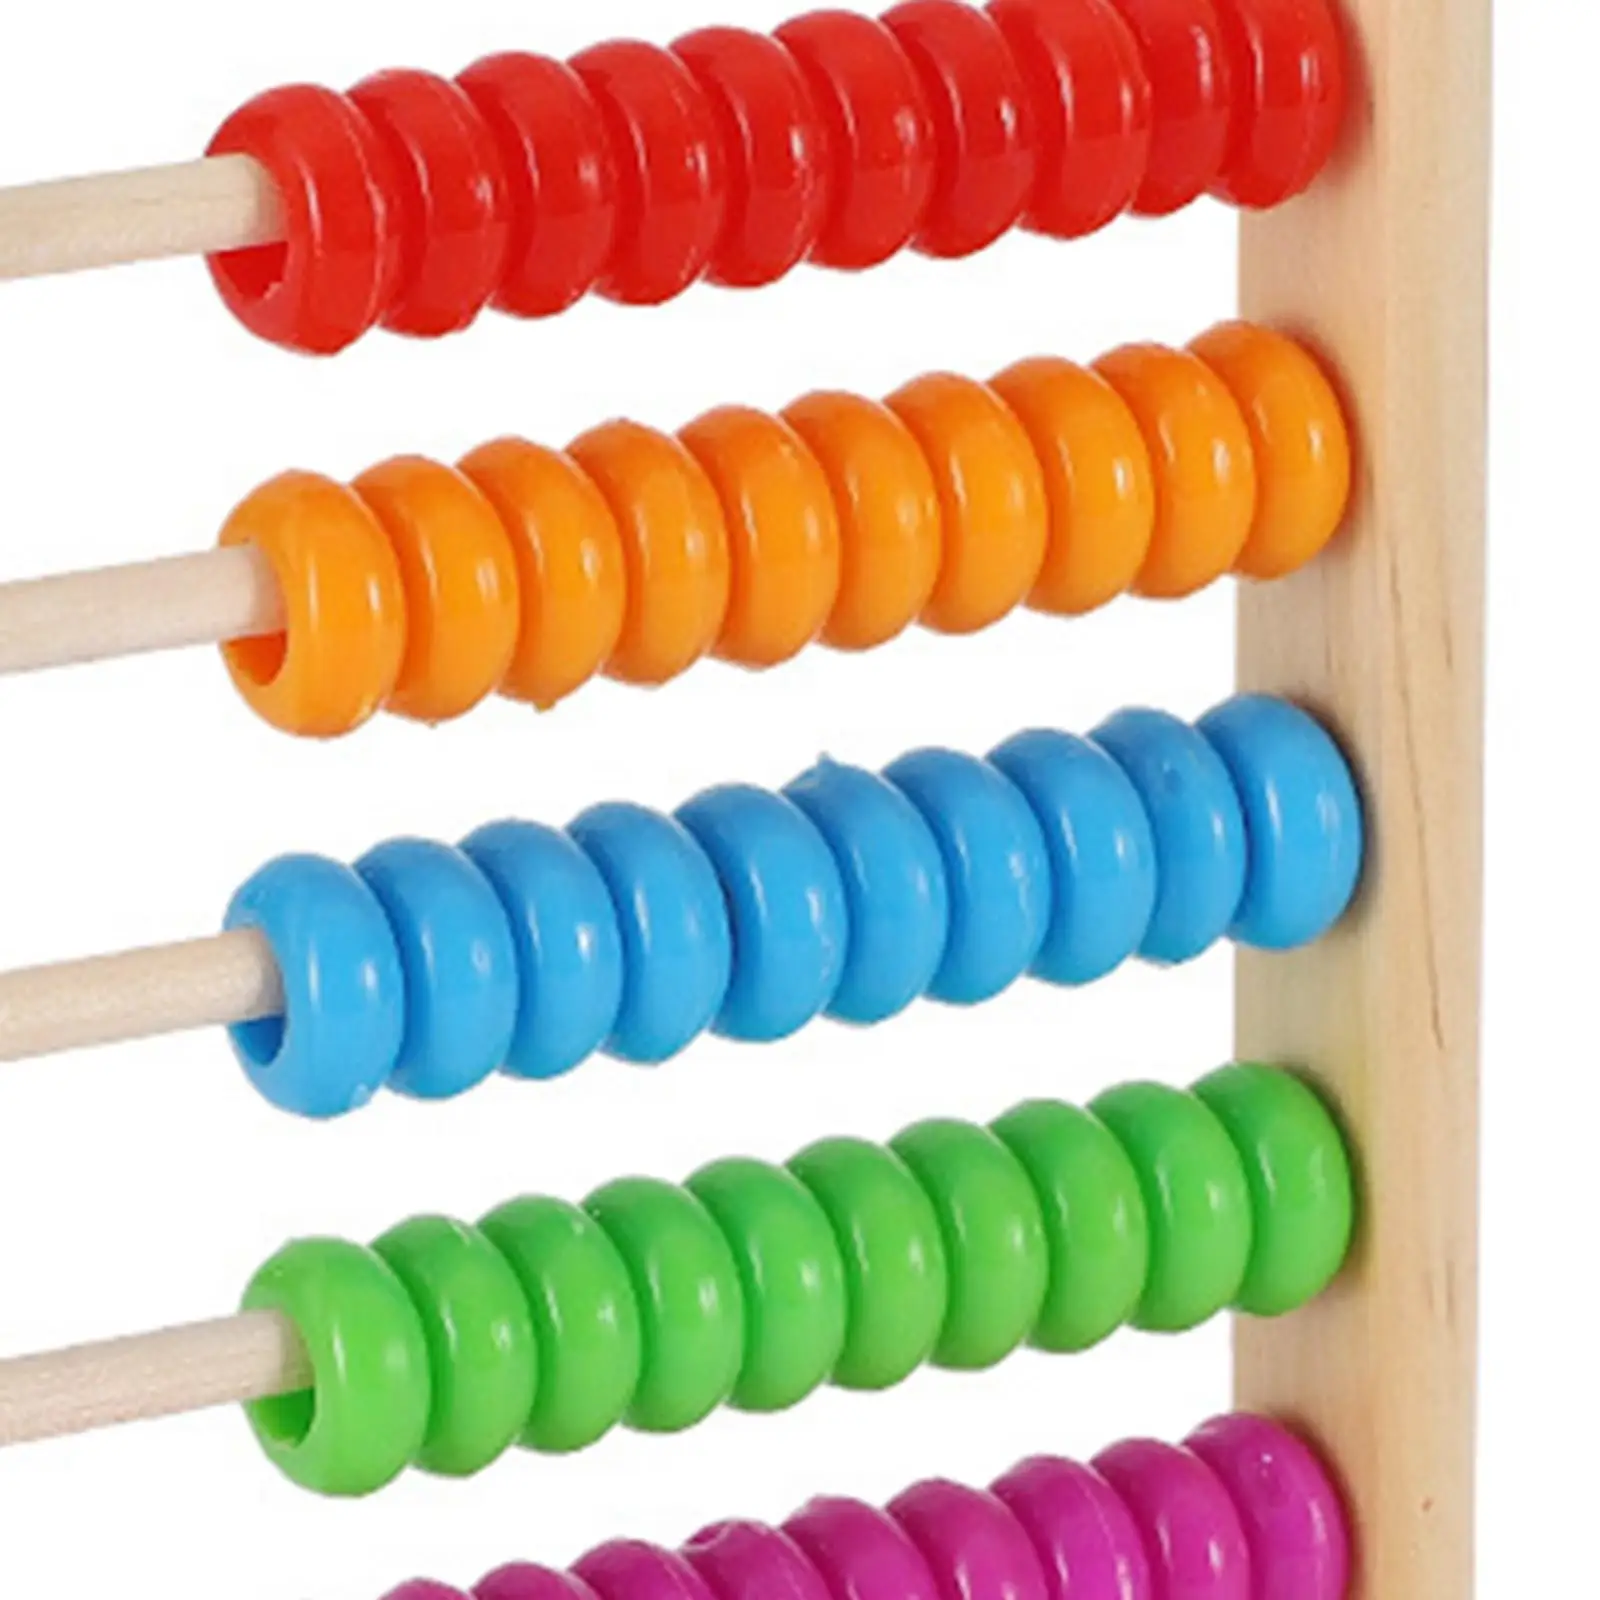 Counting Abacus Toy Learning Math Colorful Beads Educational Toy Counting Frame Educational Toy for Children Preschool Kids Baby